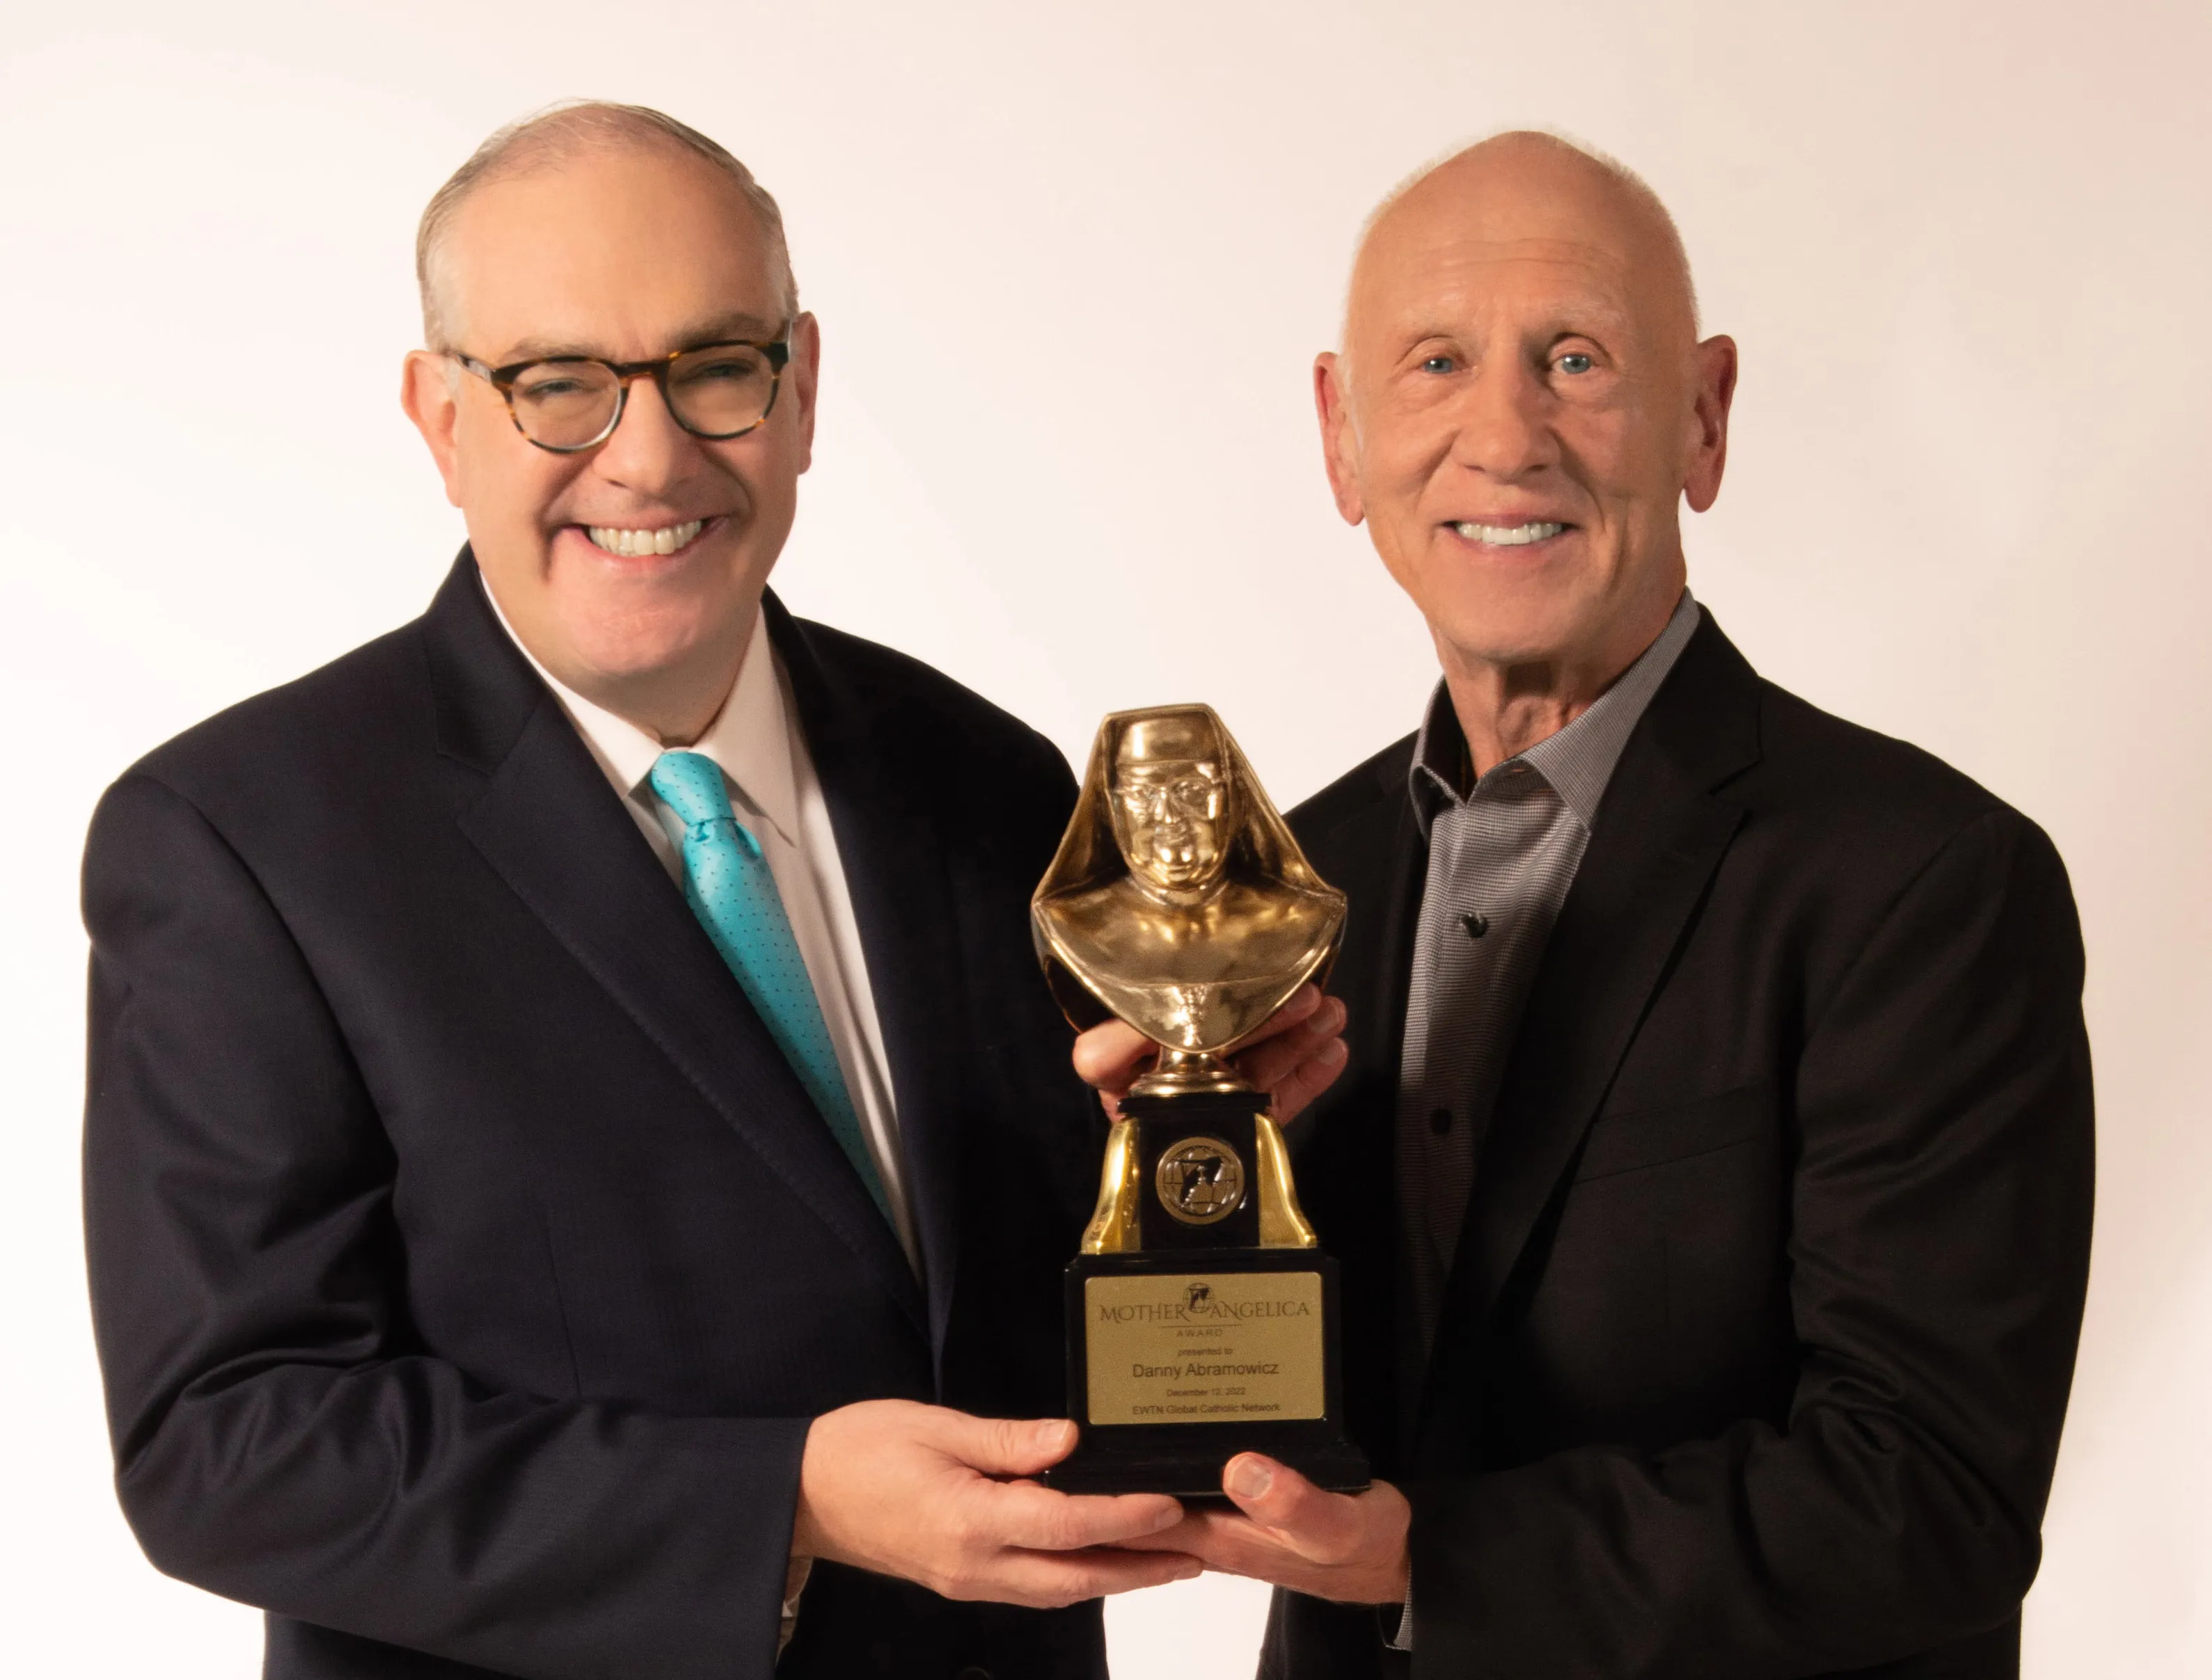 EWTN Chairman and Chief Executive Officer Michael P. Warsaw presents the 2022 Mother Angelica Award to former NFL star and coach Danny Abramowicz in honor of his lifetime of service to the new evangelization.?w=200&h=150